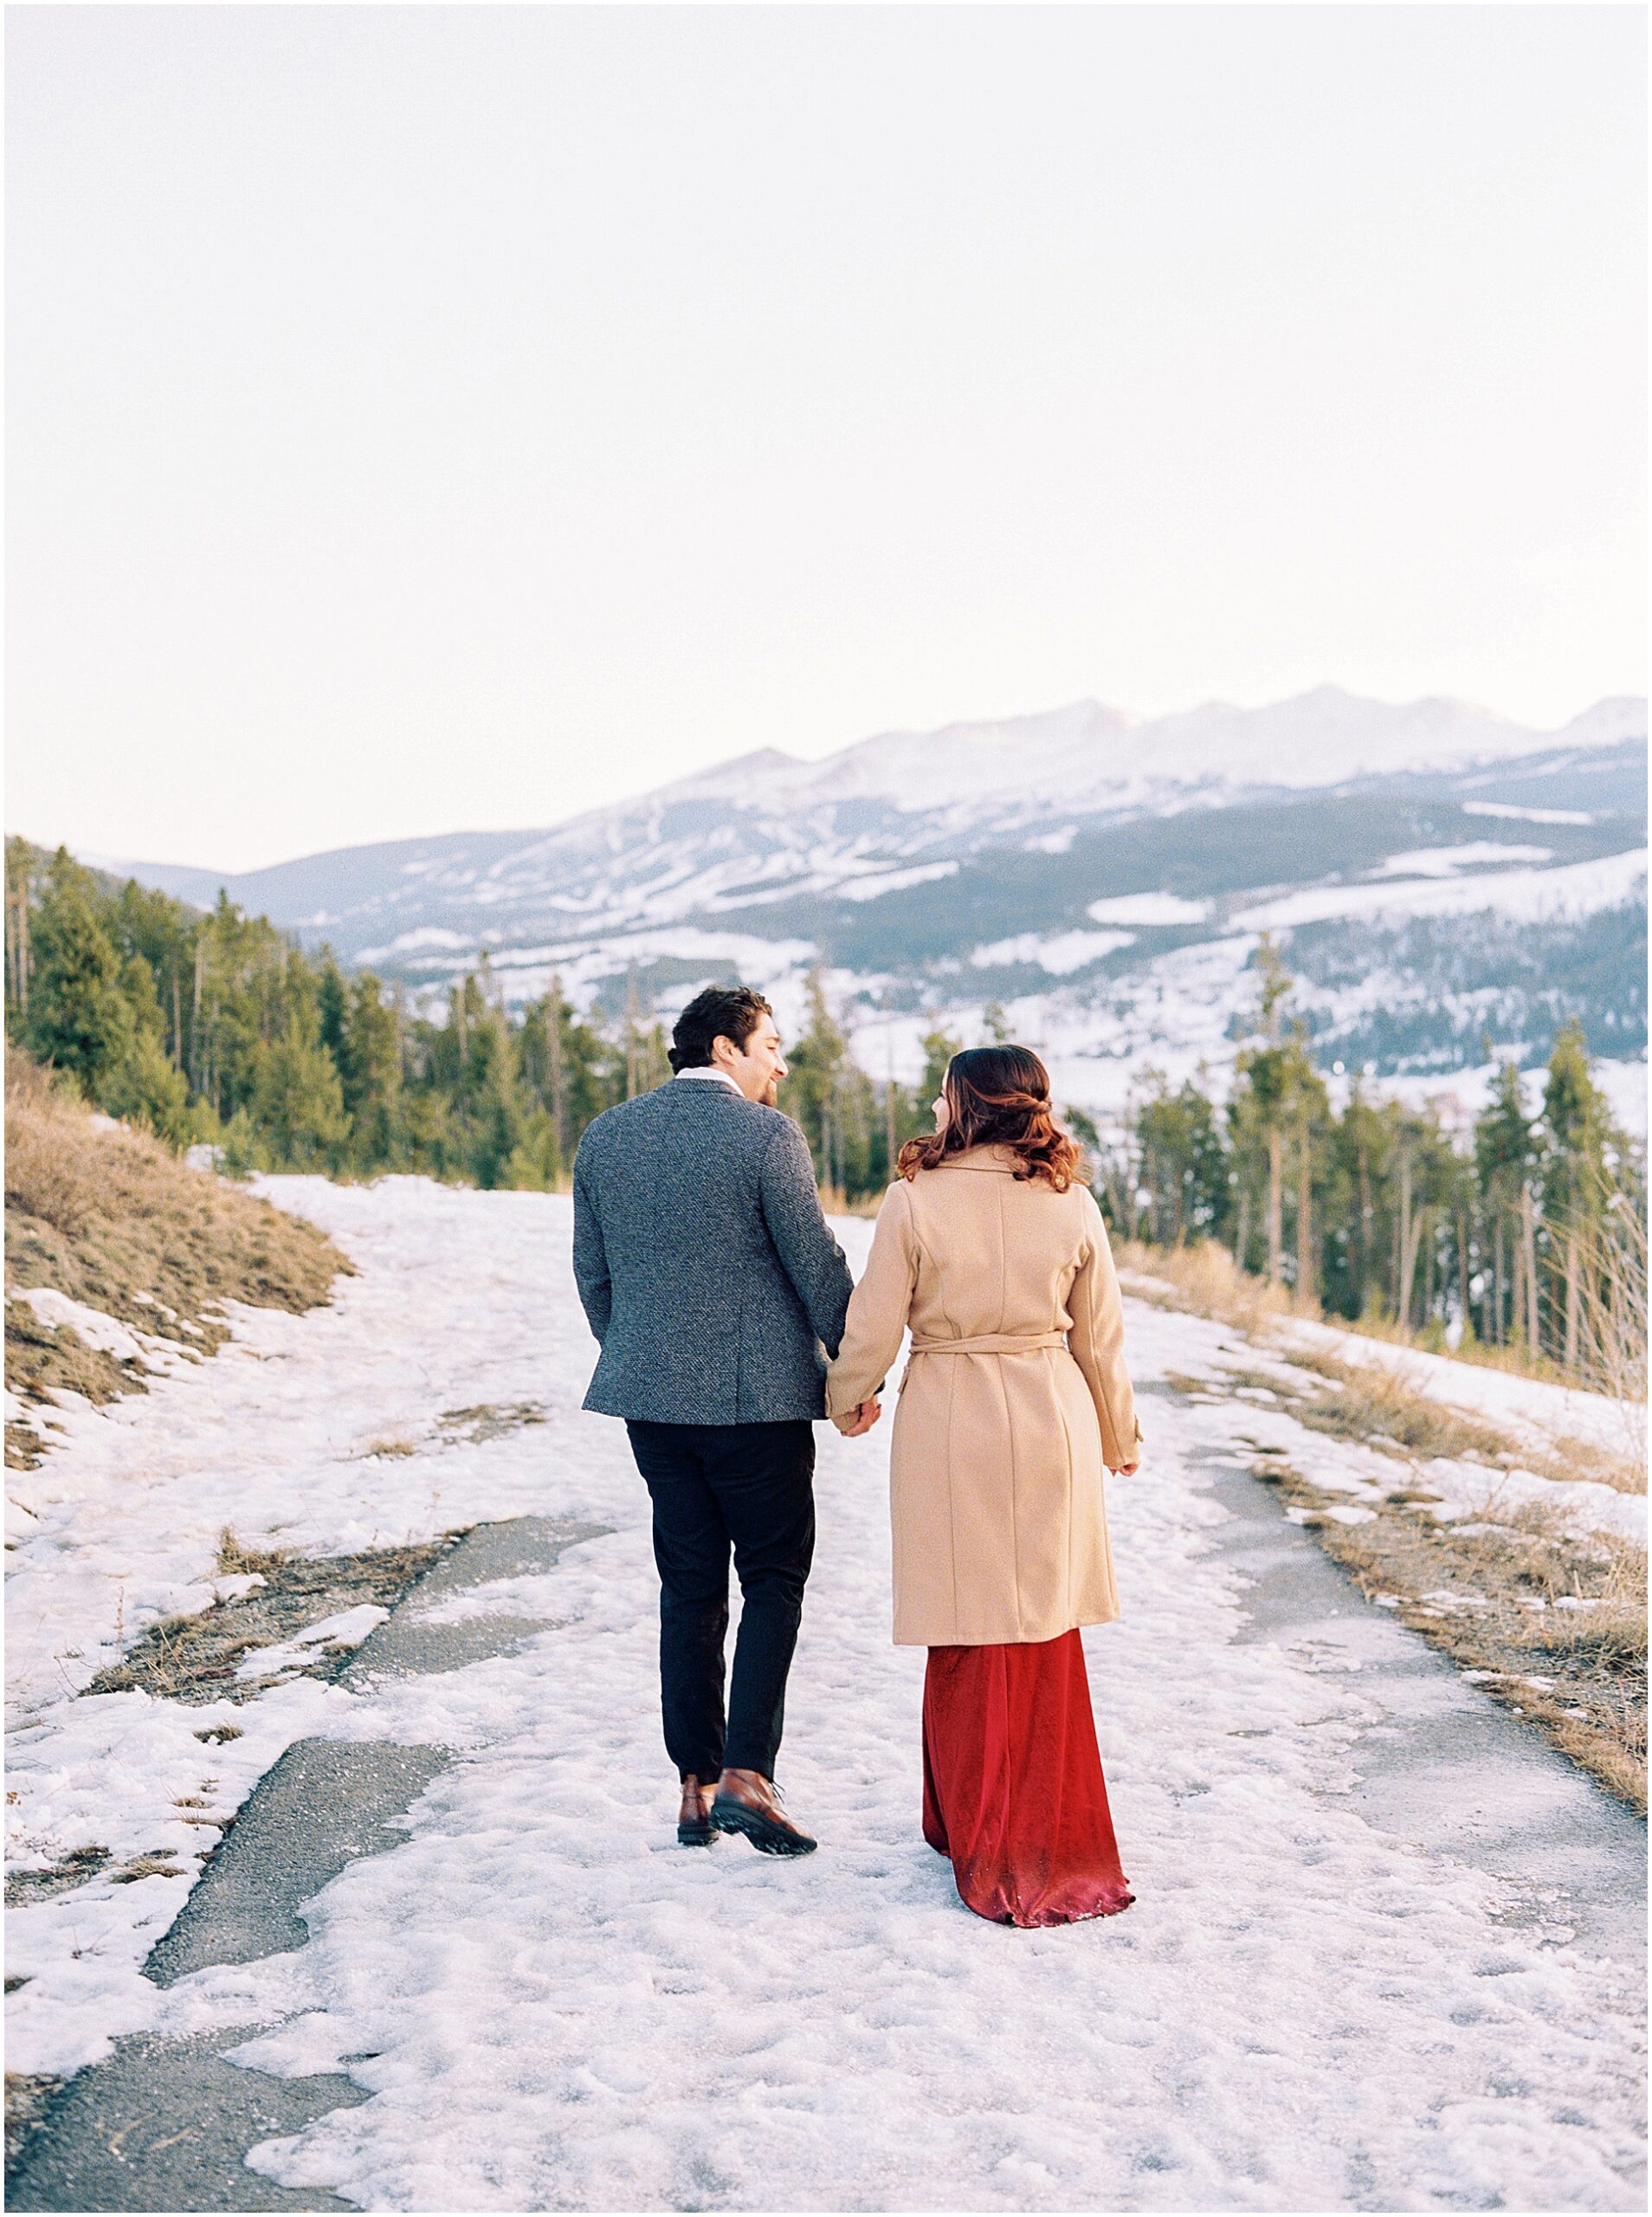 A couple at Sapphire Point, Colorado, overlooking the mountains and Lake Dillon